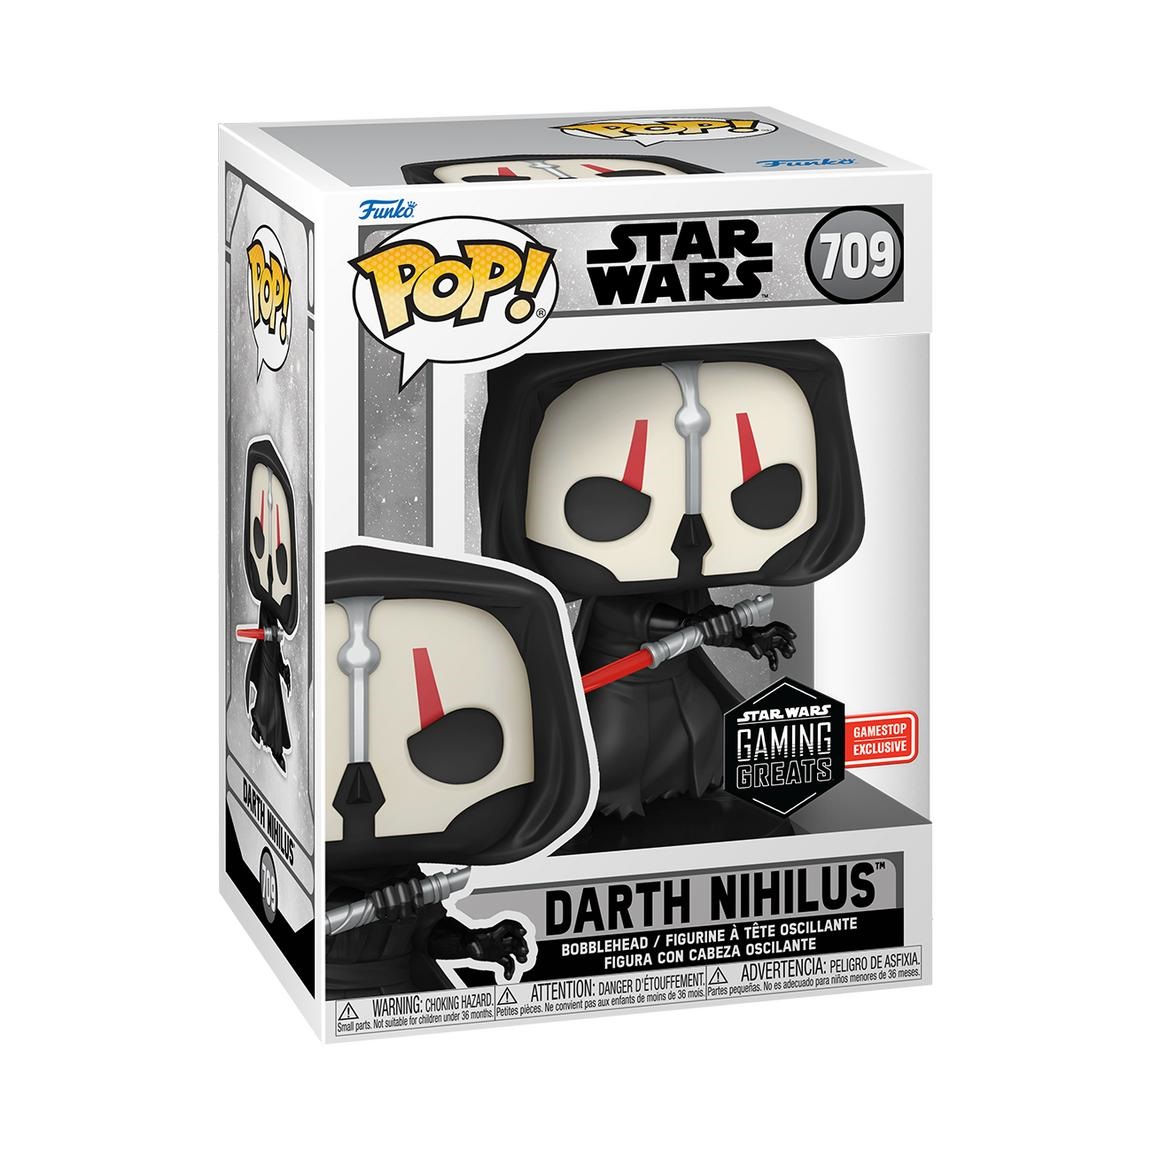 Nothing makes sense anymore: They're making Funko Pops out of the cult classic 2004 Obsidian RPG, Star Wars: Knights of the Old Republic 2: The Sith Lords